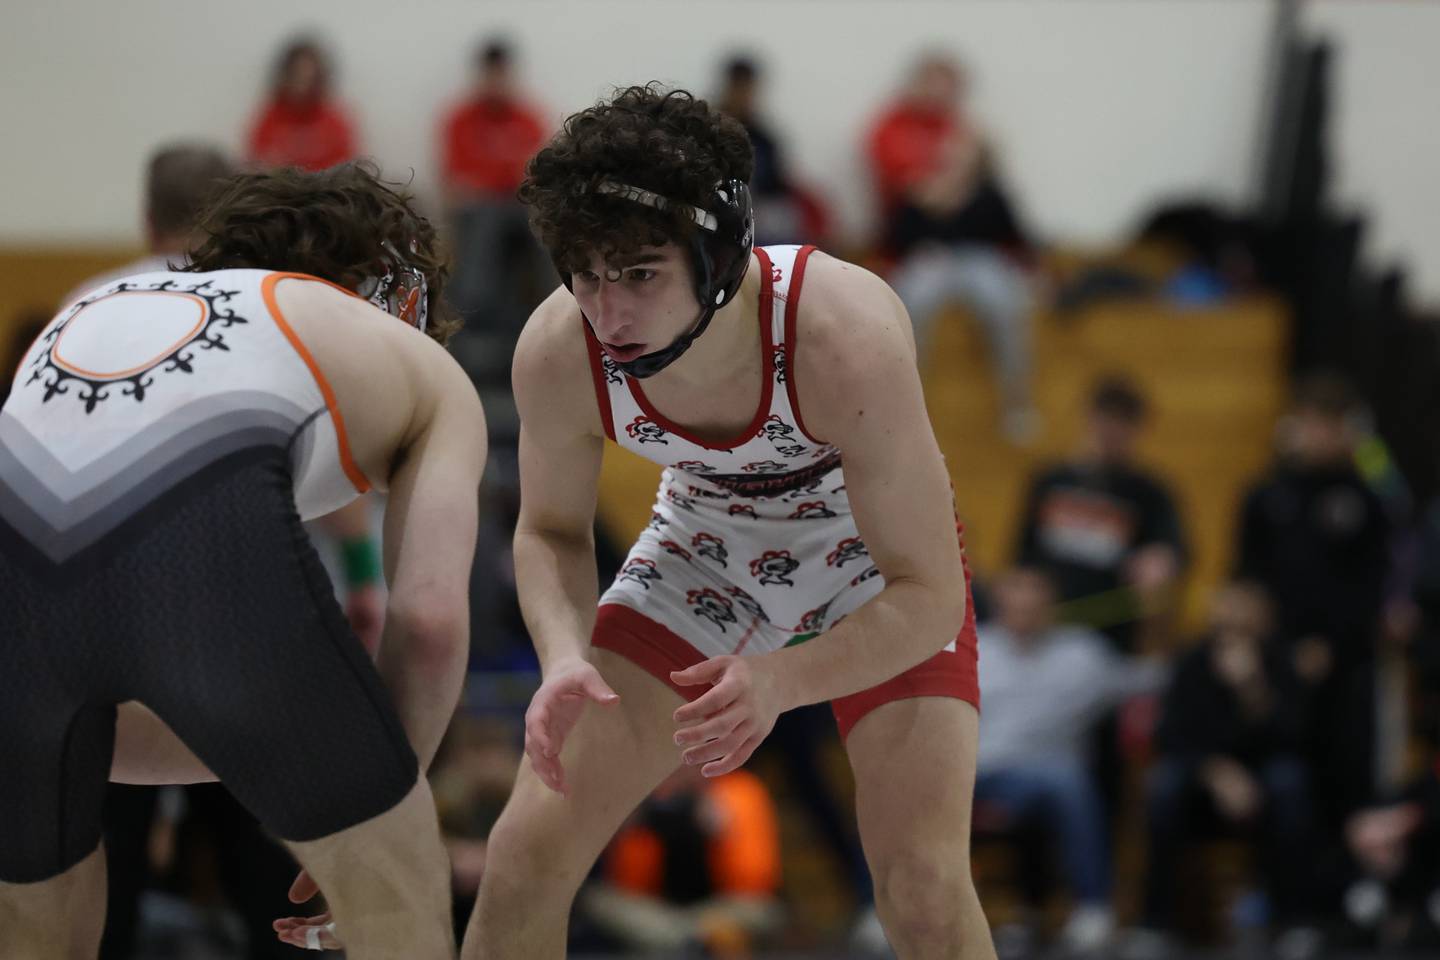 Lincoln-Way Central’s Nathan Knowlton faces off against St. Charles East’s Ben Davino in the Illini Classic 126 weight championship match at Lincoln-Way Central.